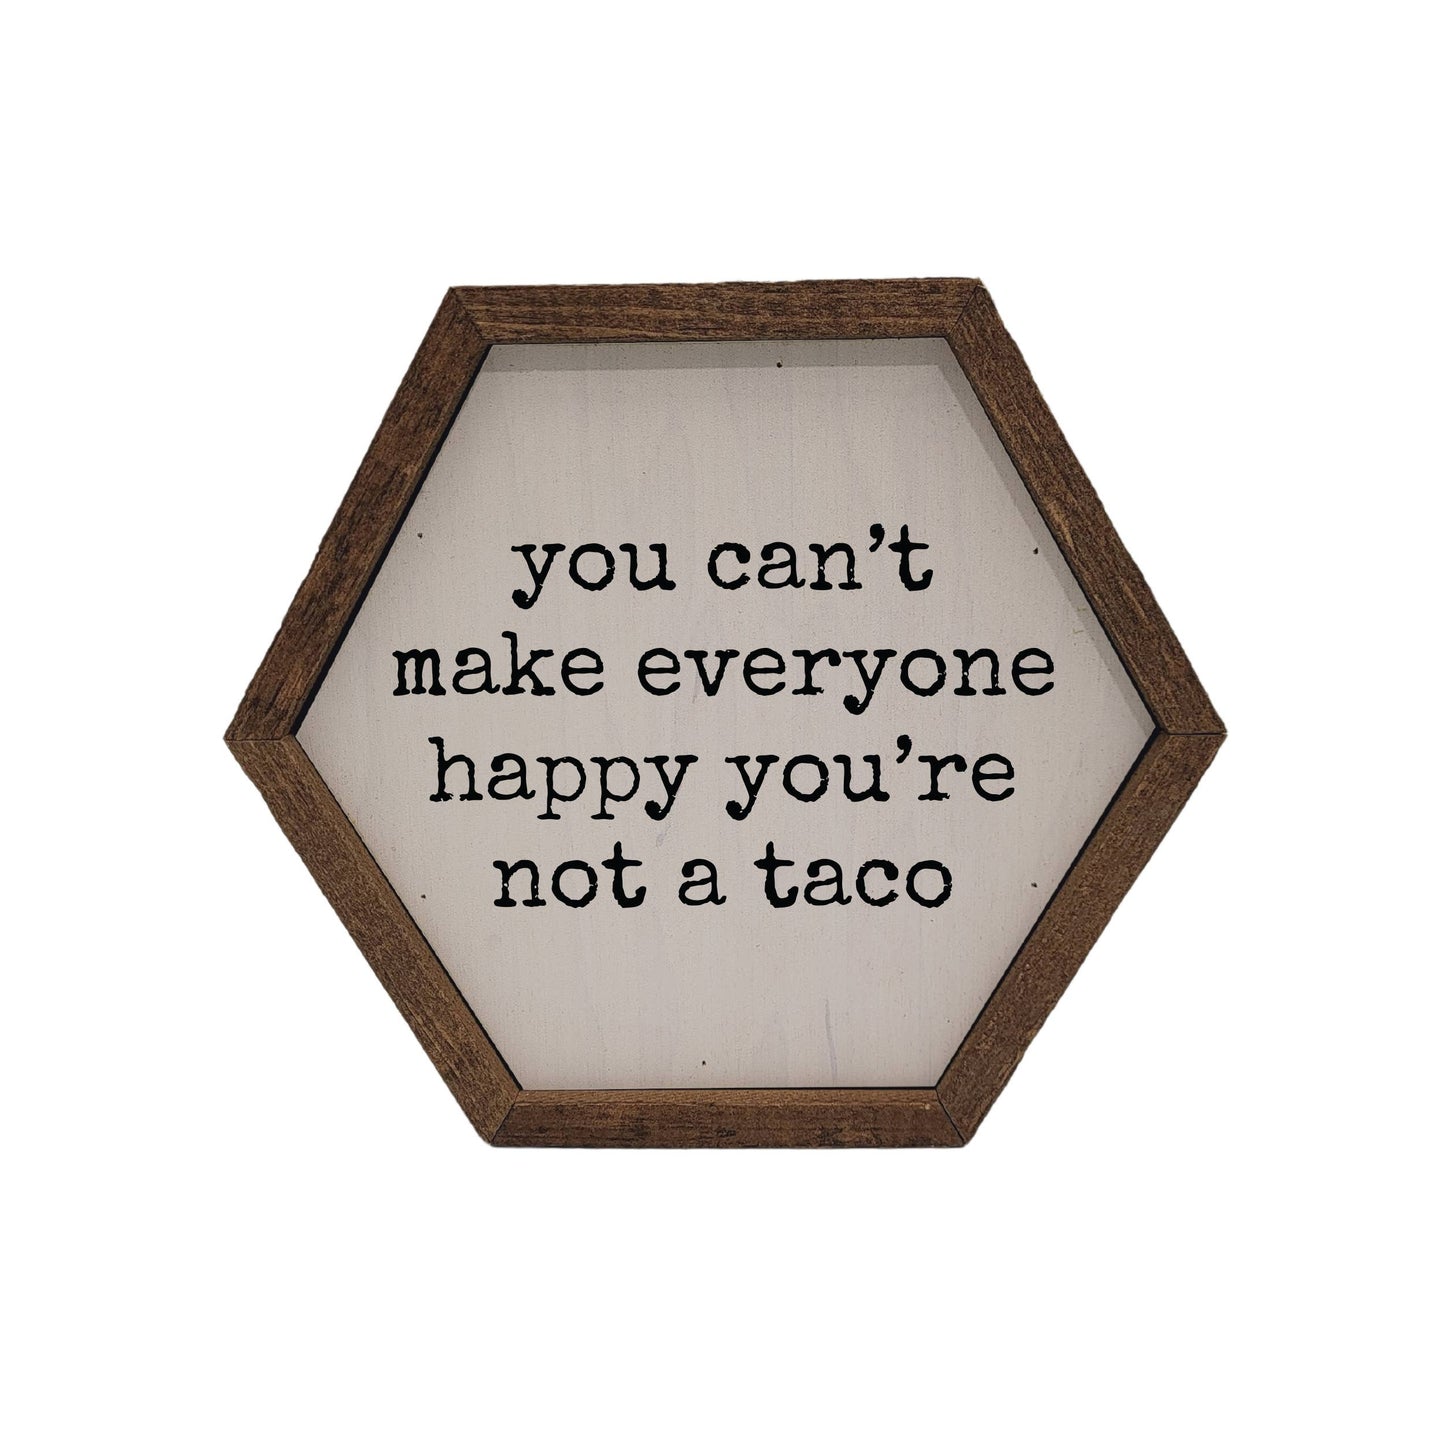 "You Can't Make Everyone Happy you're not a taco" Creative Hexagon Wooden Sign